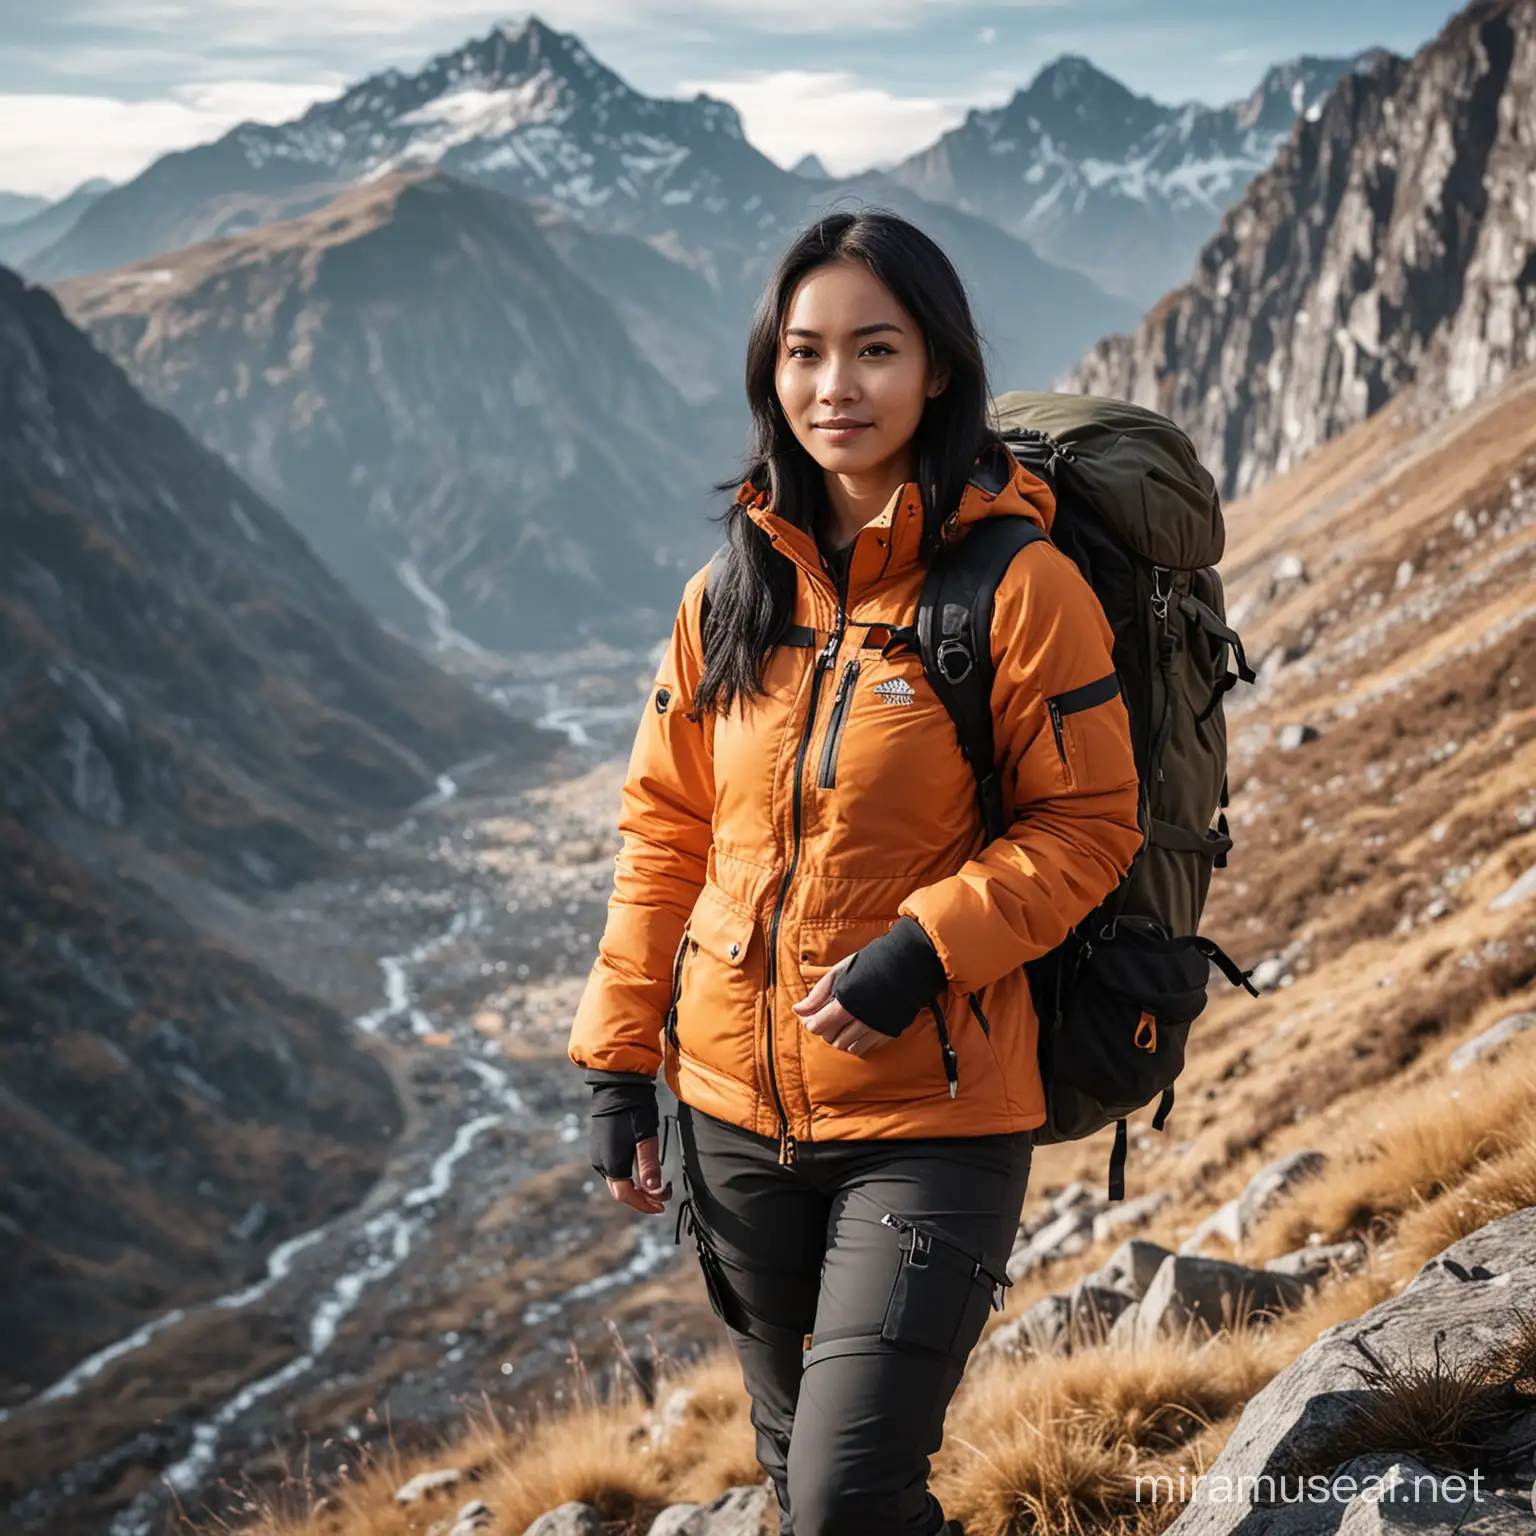 Stunning Indonesian Woman in Mountain Climber Gear against Morning Mountainscape